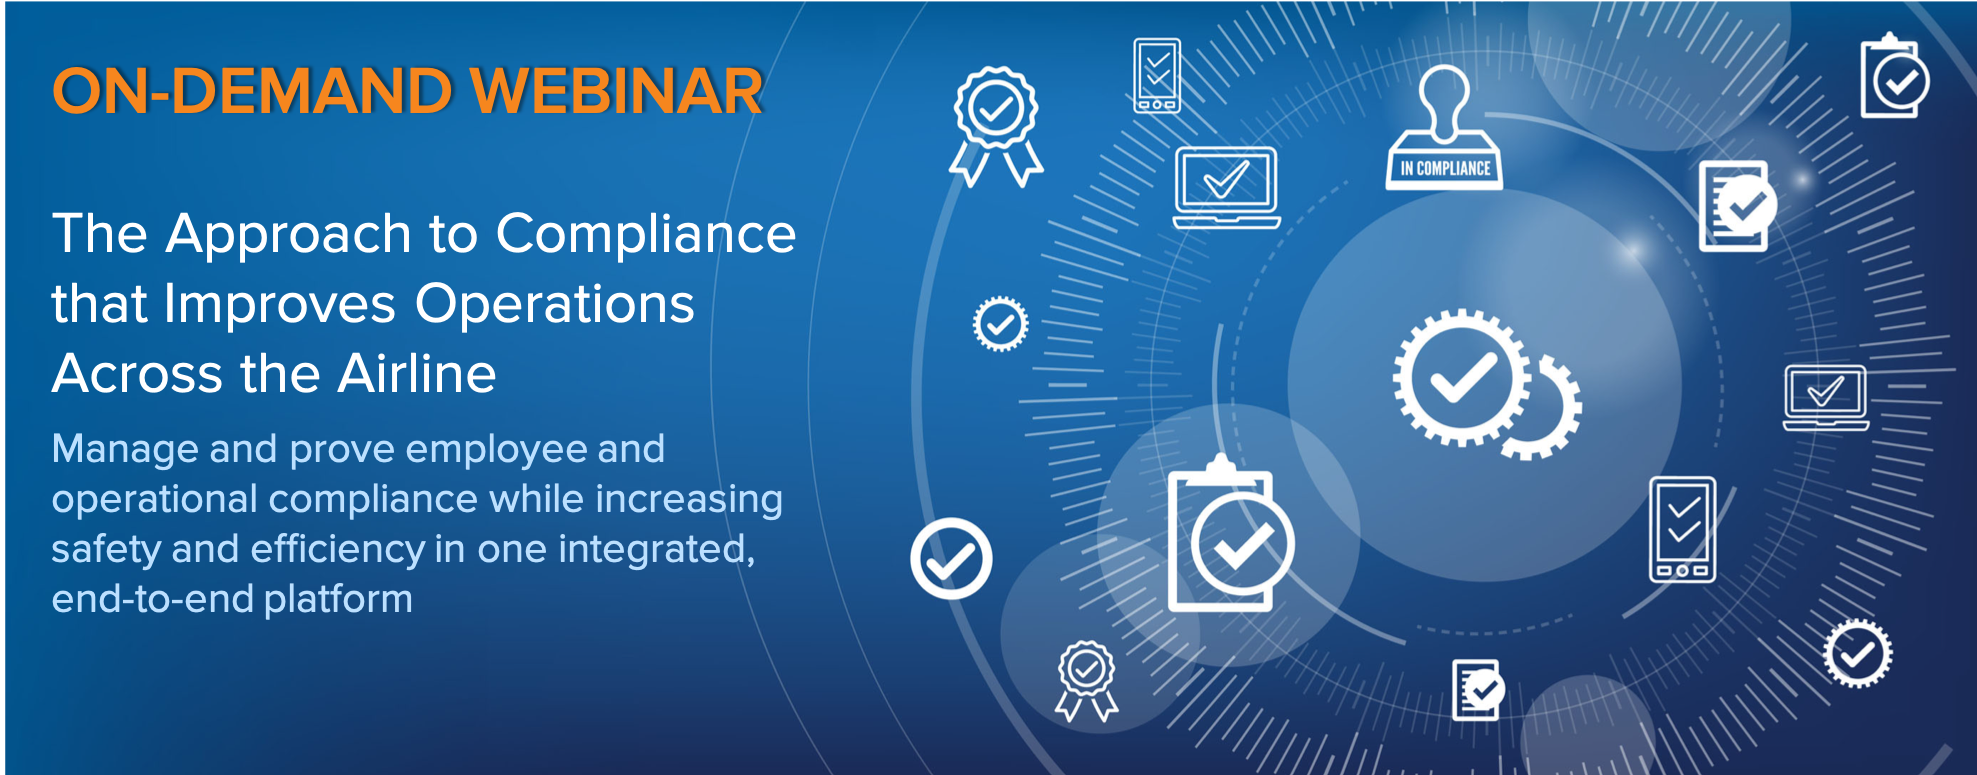 Webinar: Approach to Compliance | airline compliance software